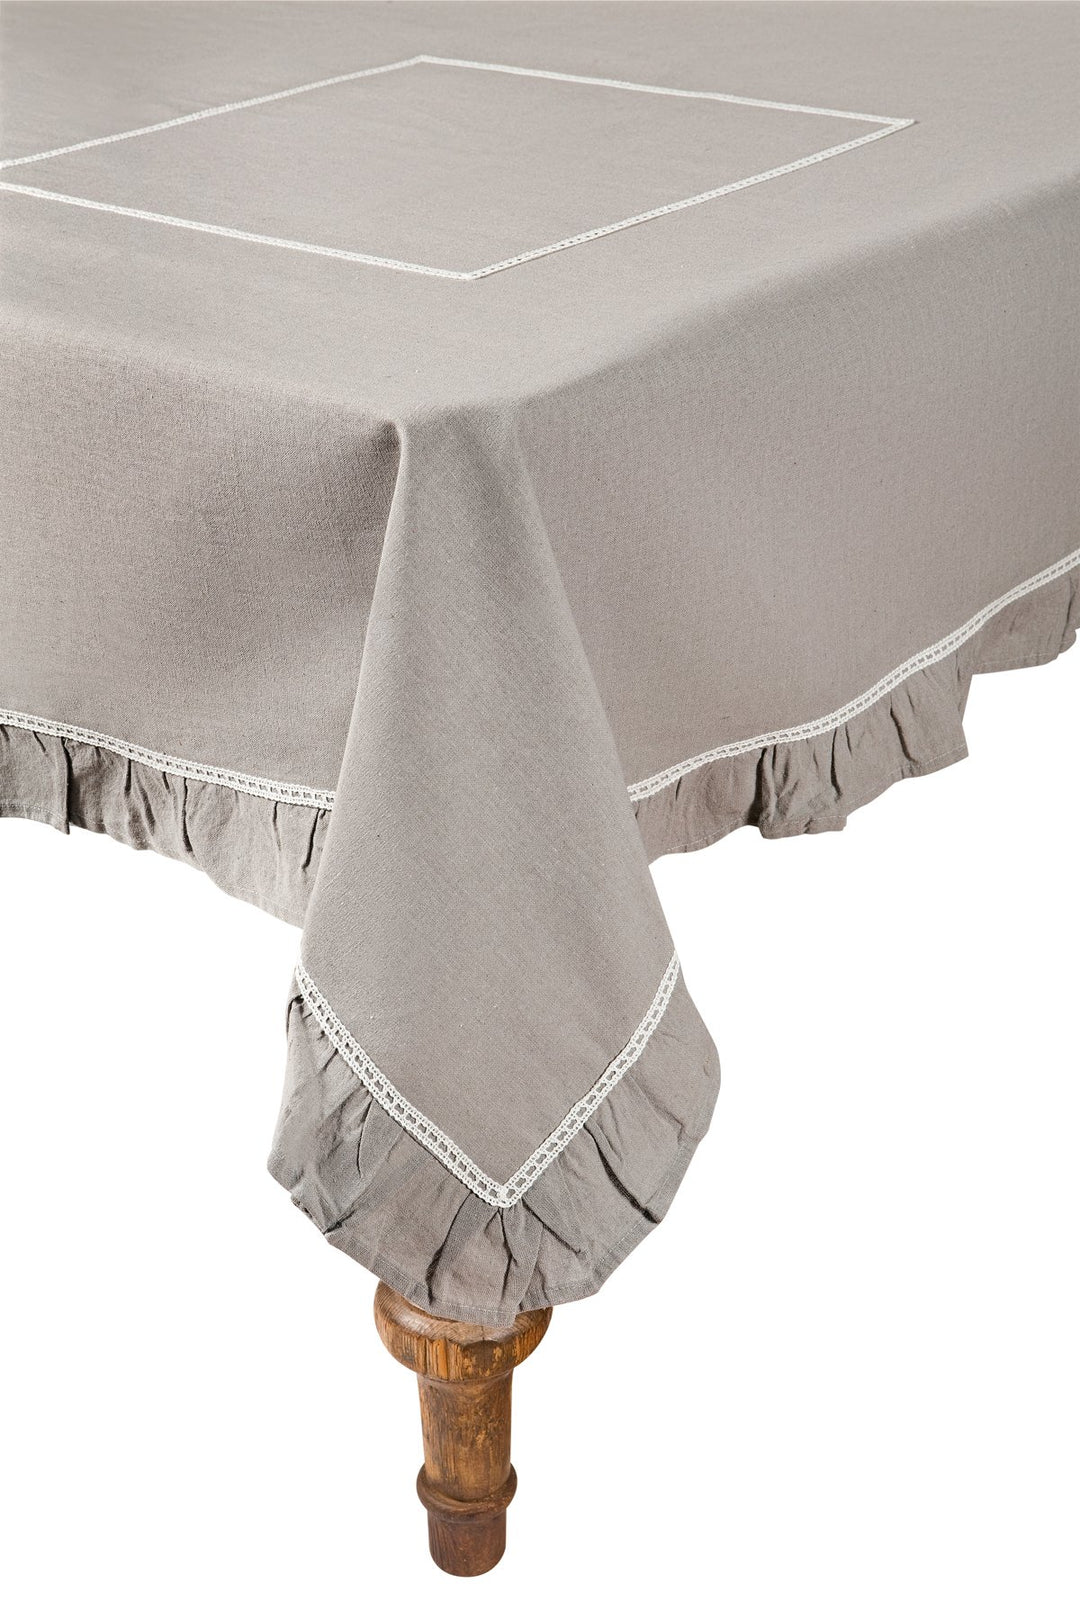 White Lace Tablecloth.